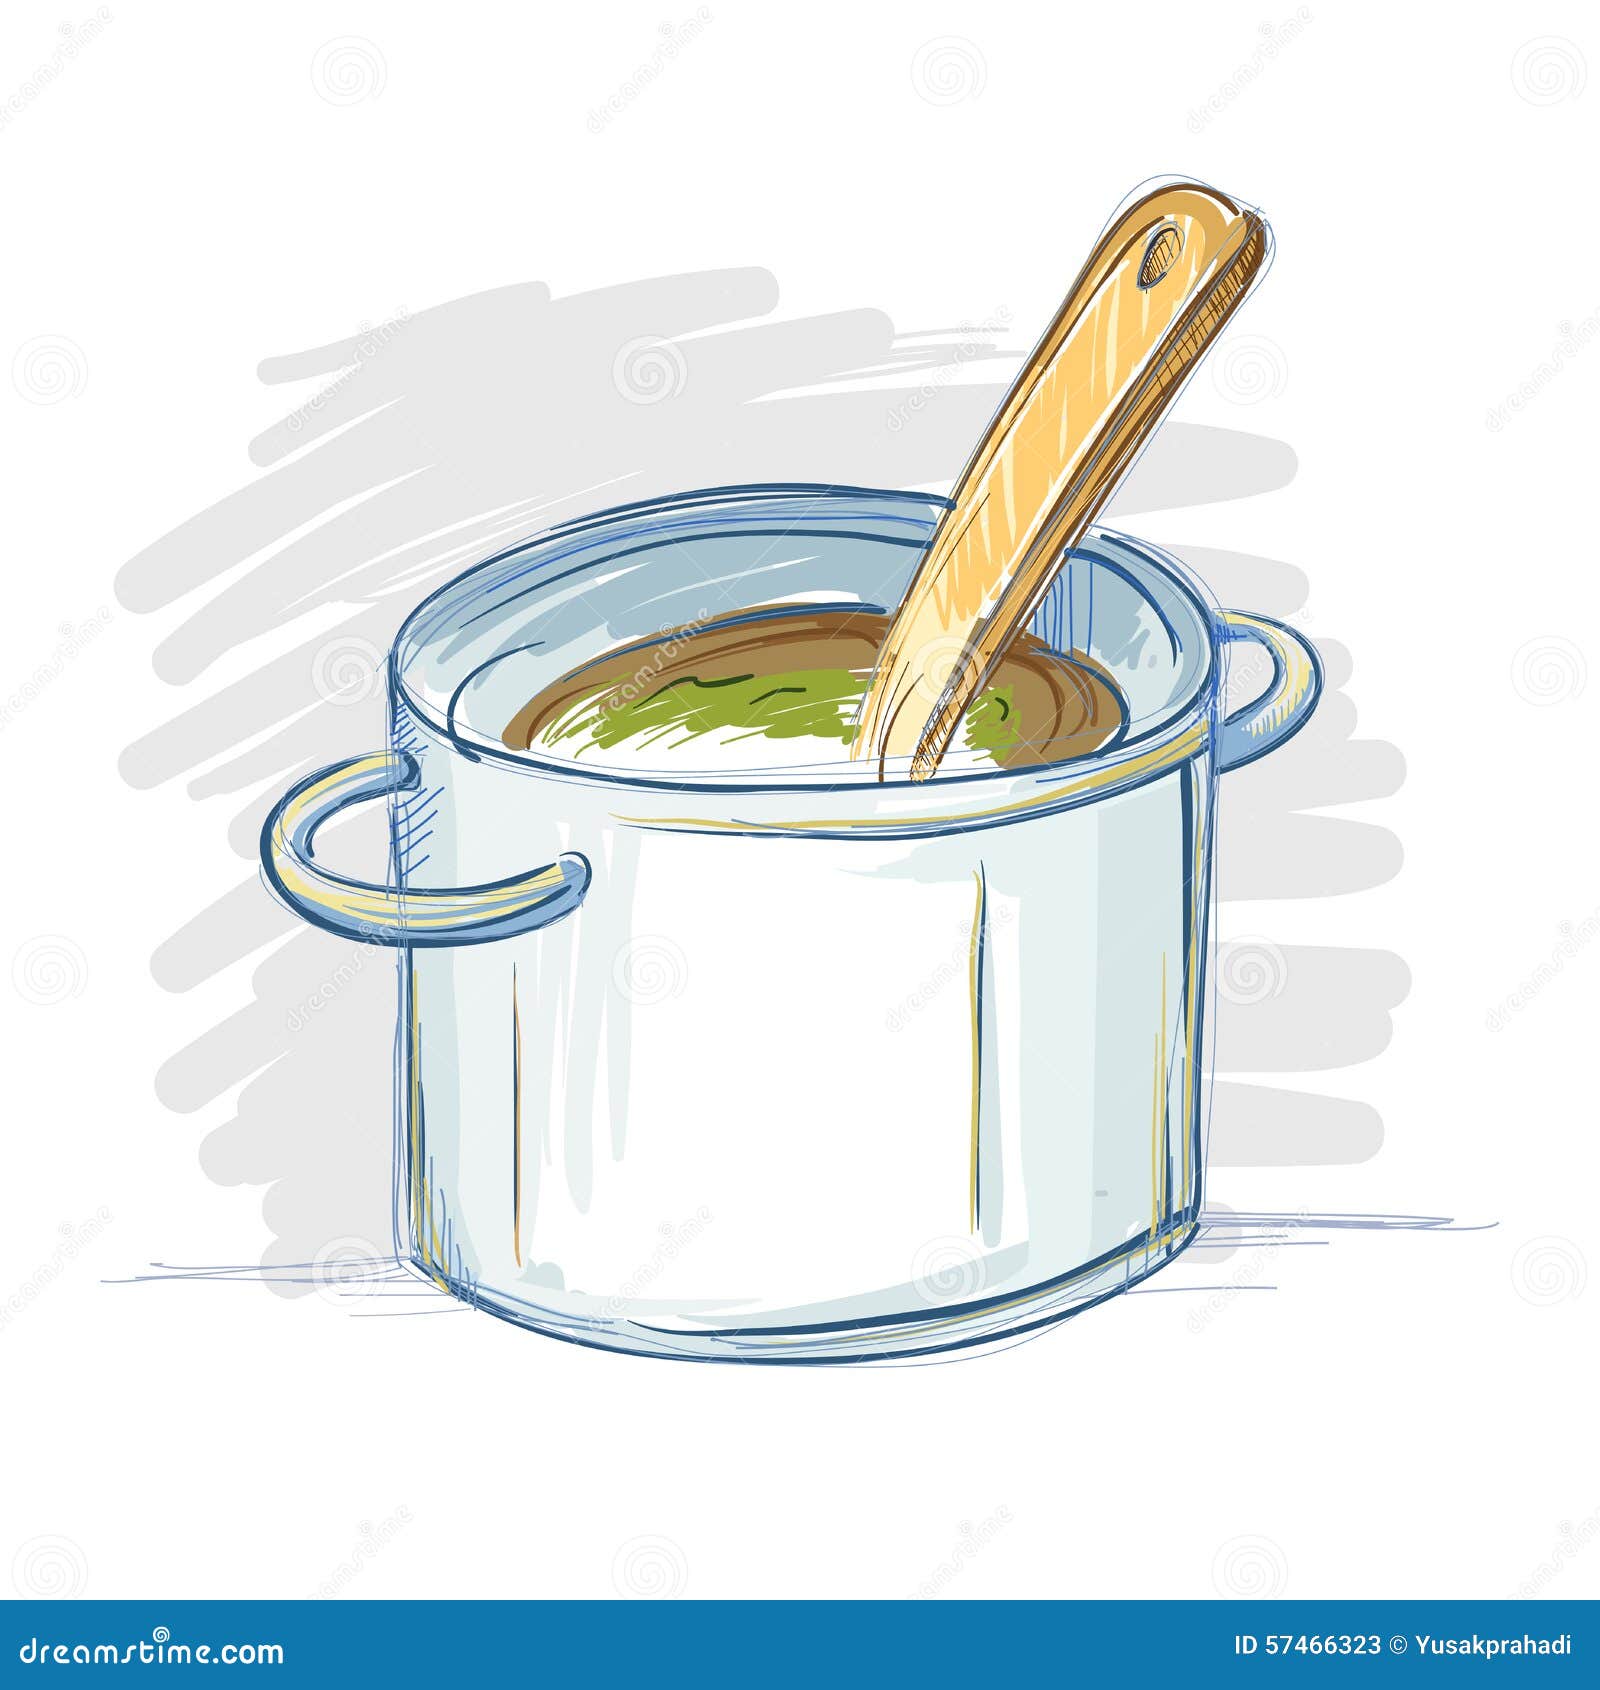 Vector Metal Chrome Cooking Pot, Ladle Sketch Cartoon Isolated Illustration  On A White Background. Kitchenware Equipment Utensil Objects Concept  Royalty Free SVG, Cliparts, Vectors, and Stock Illustration. Image 84564630.